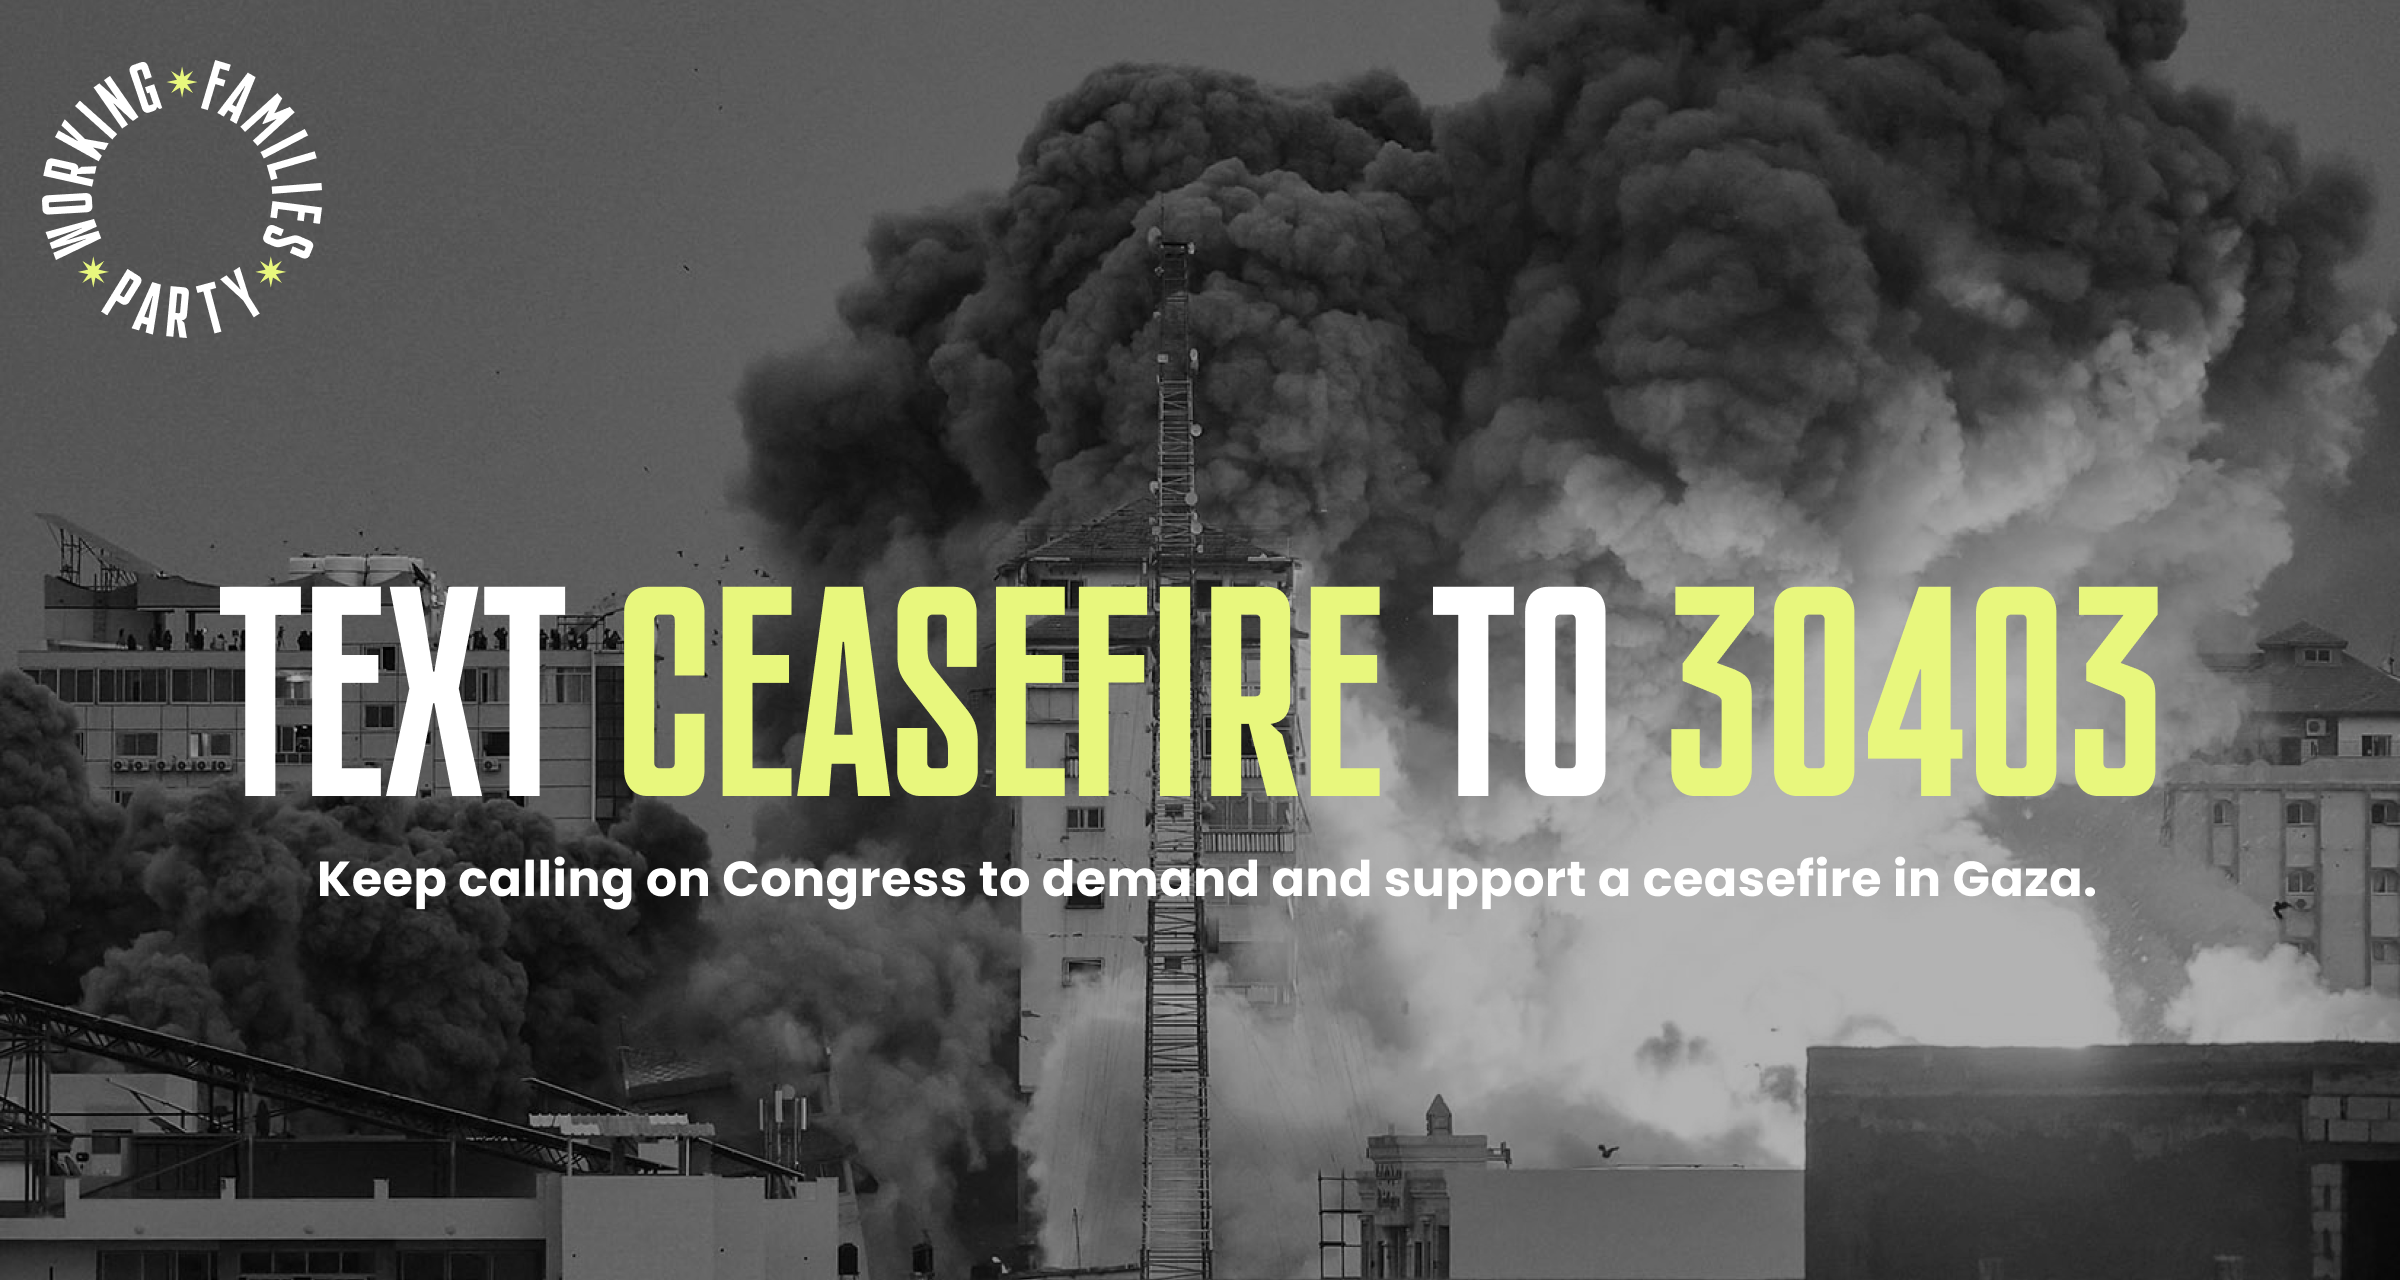 Text Ceasefire to 30403. Keep calling on Congress to demand and support a ceasefire in Gaza.